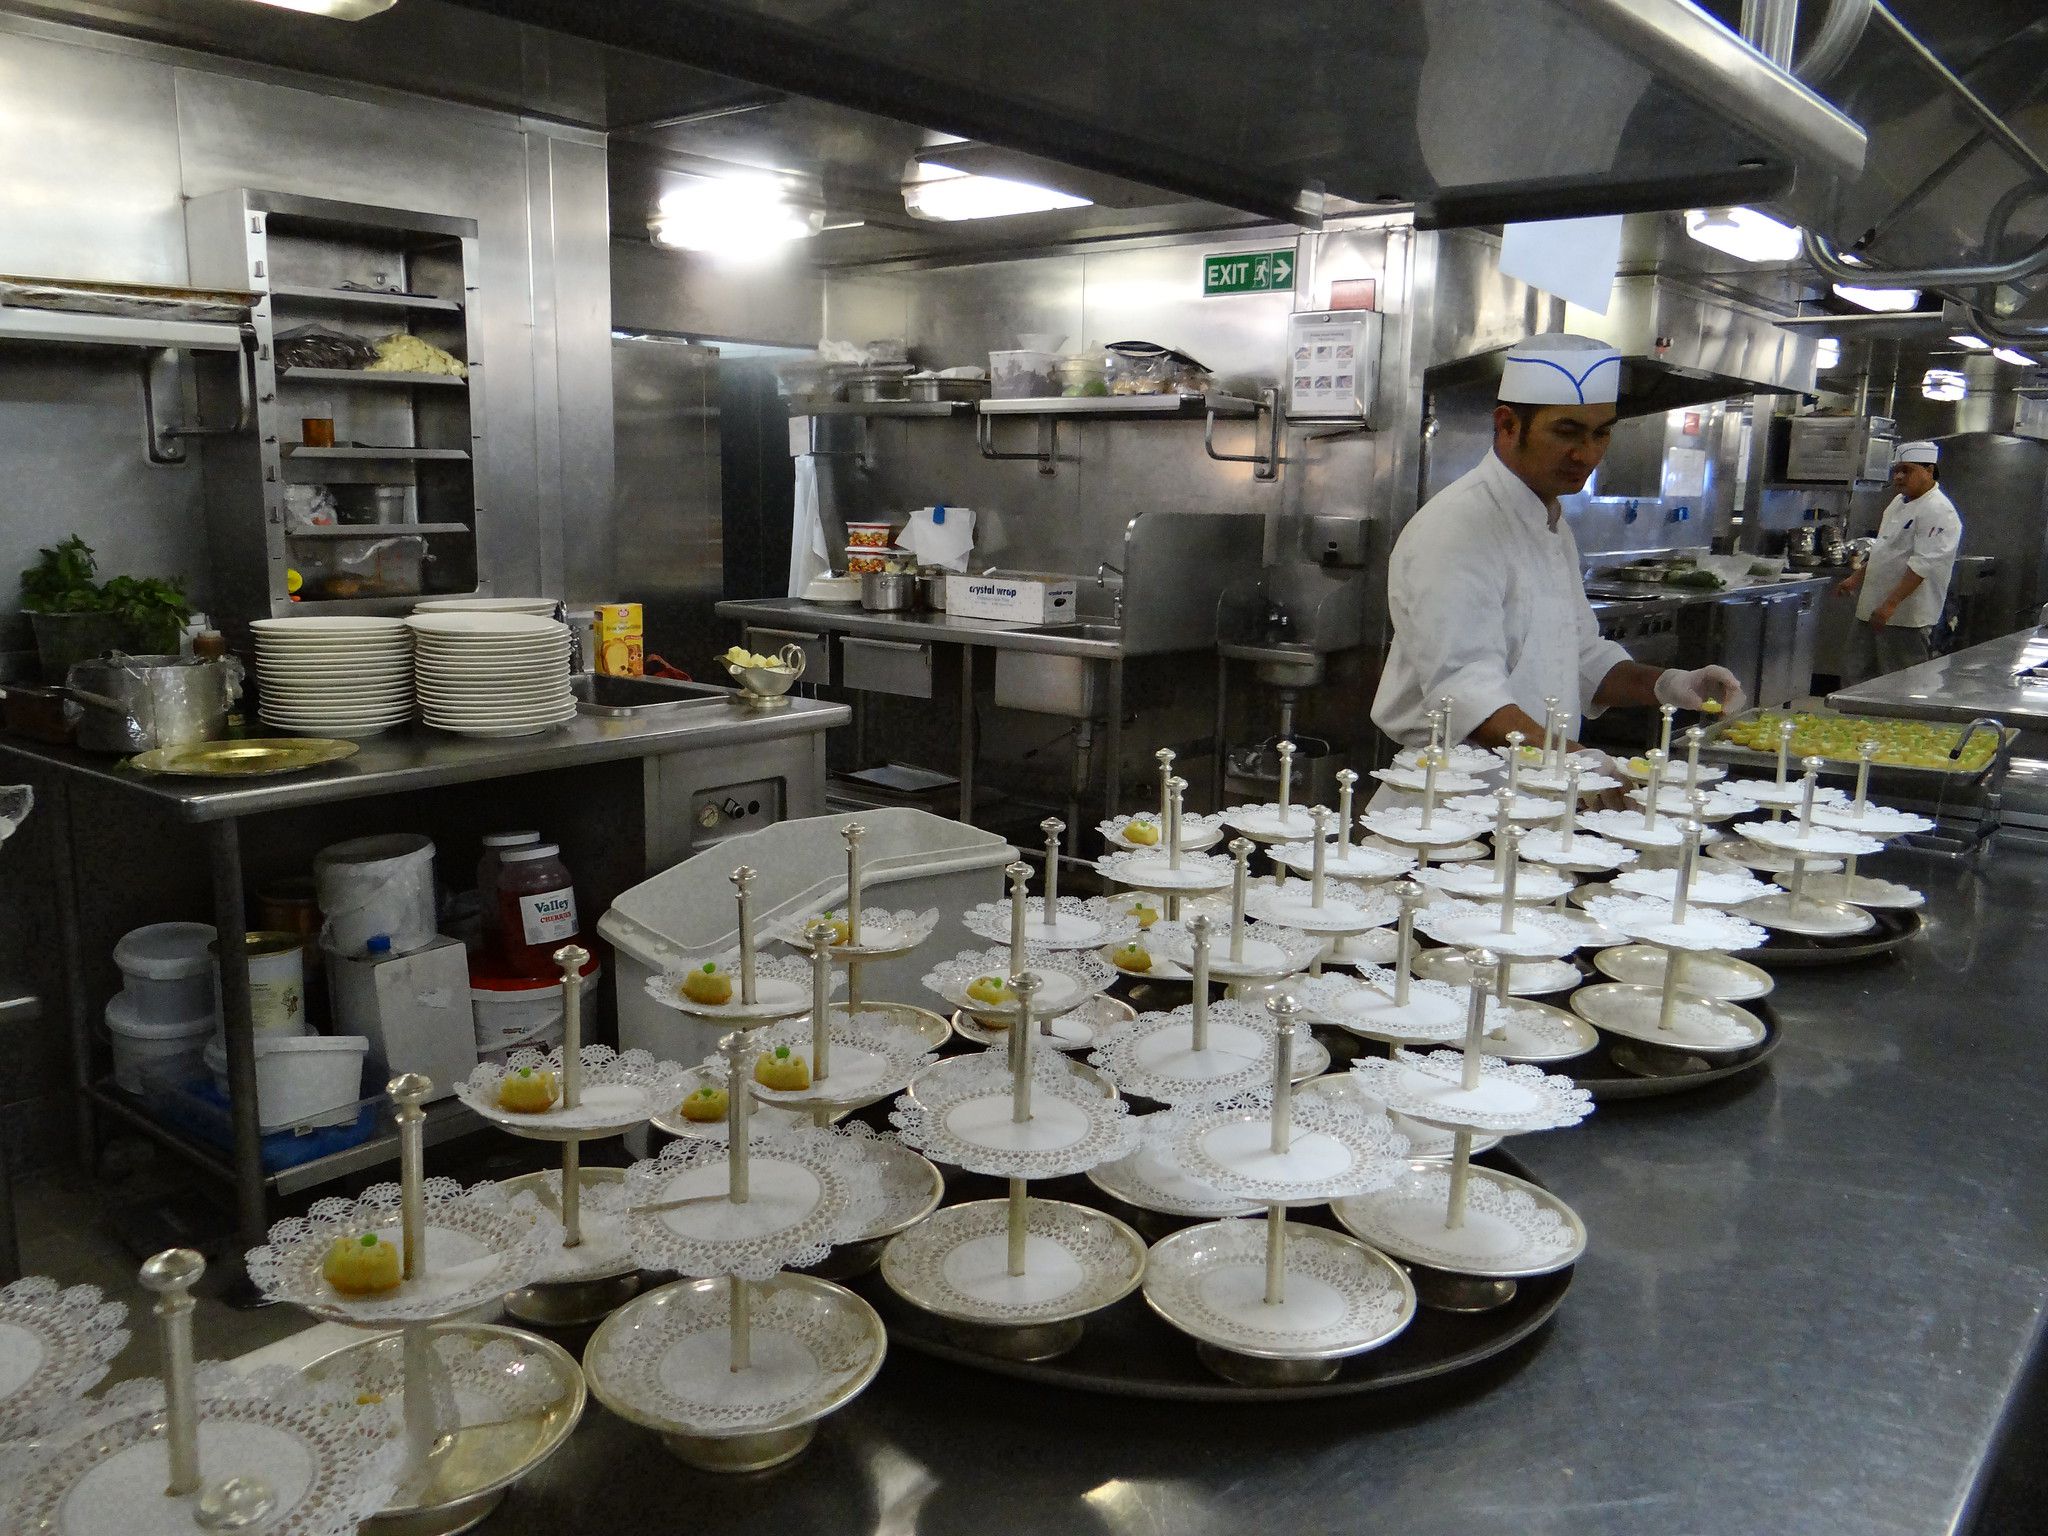 <p>Much of the food that guests eat is freshly made. Cruise ship kitchens bake bread onboard, often three times a day. The movement of the ship, the air temperature, and moisture make baking bread extra tricky. Kitchens also hand-make ice cream daily to ensure that it’s fresh and available.</p>